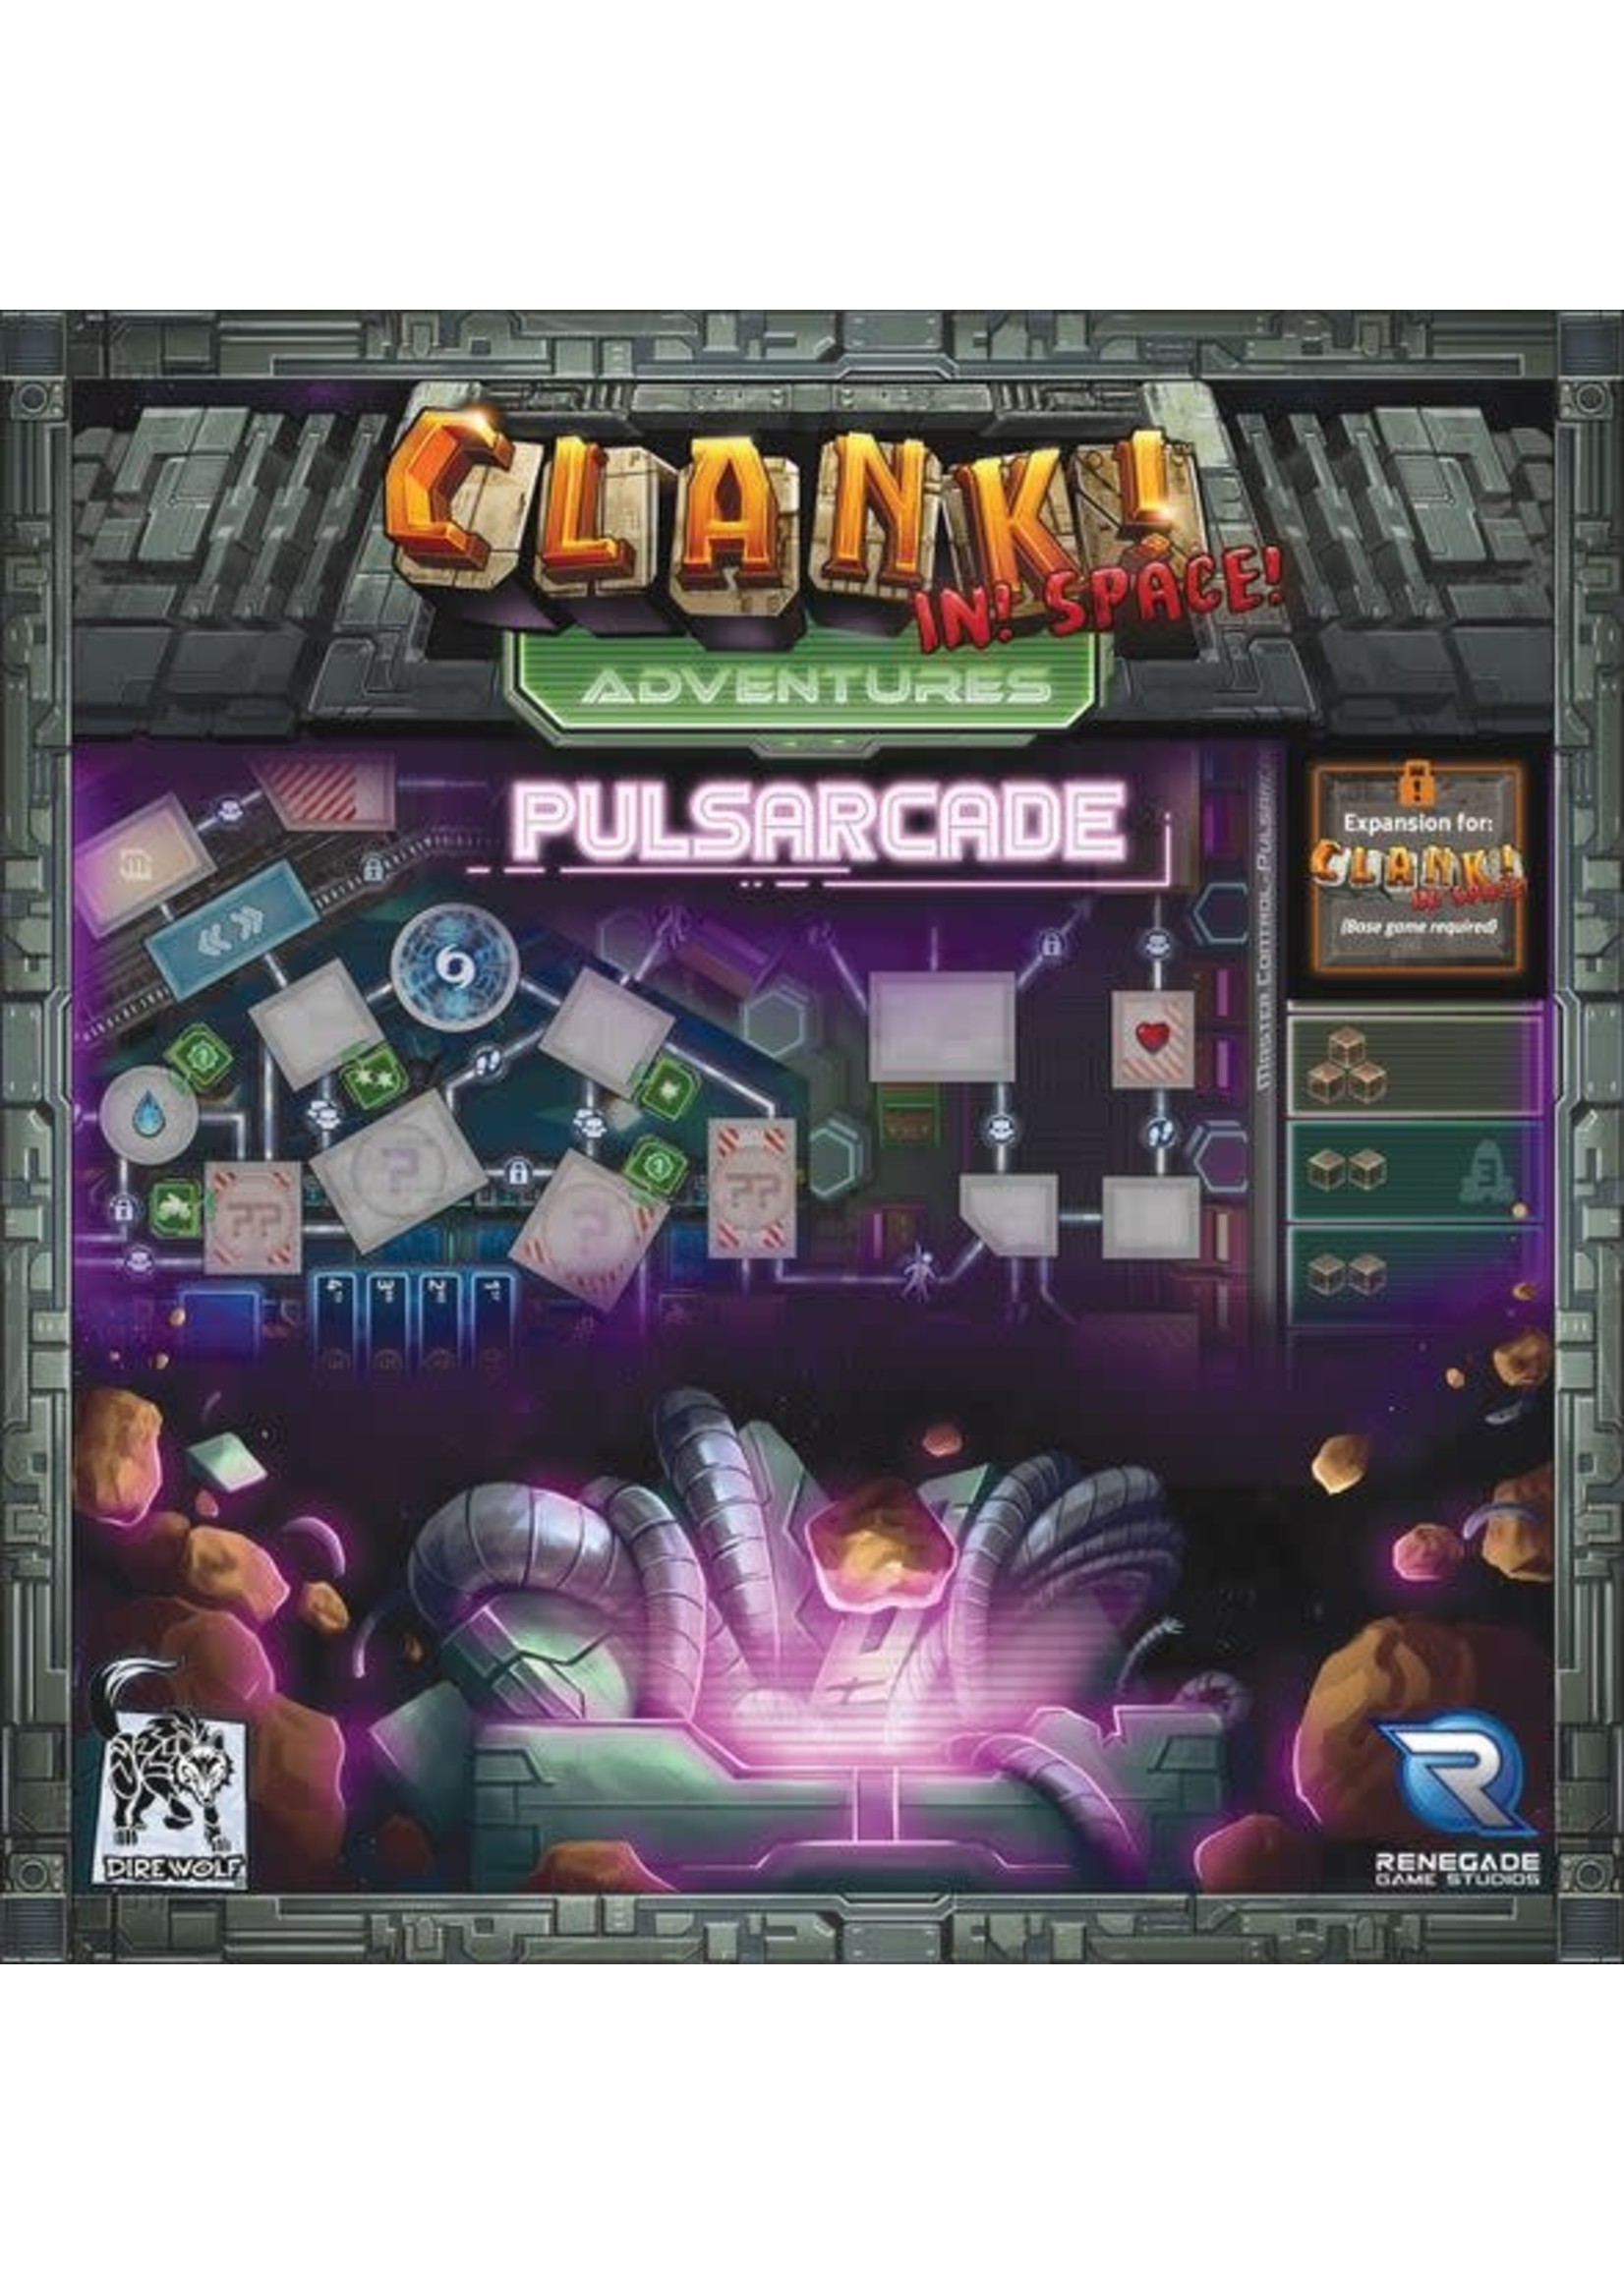 Dire Wolf Clank! In! Space! Adventures Pulsarcade - Expansion